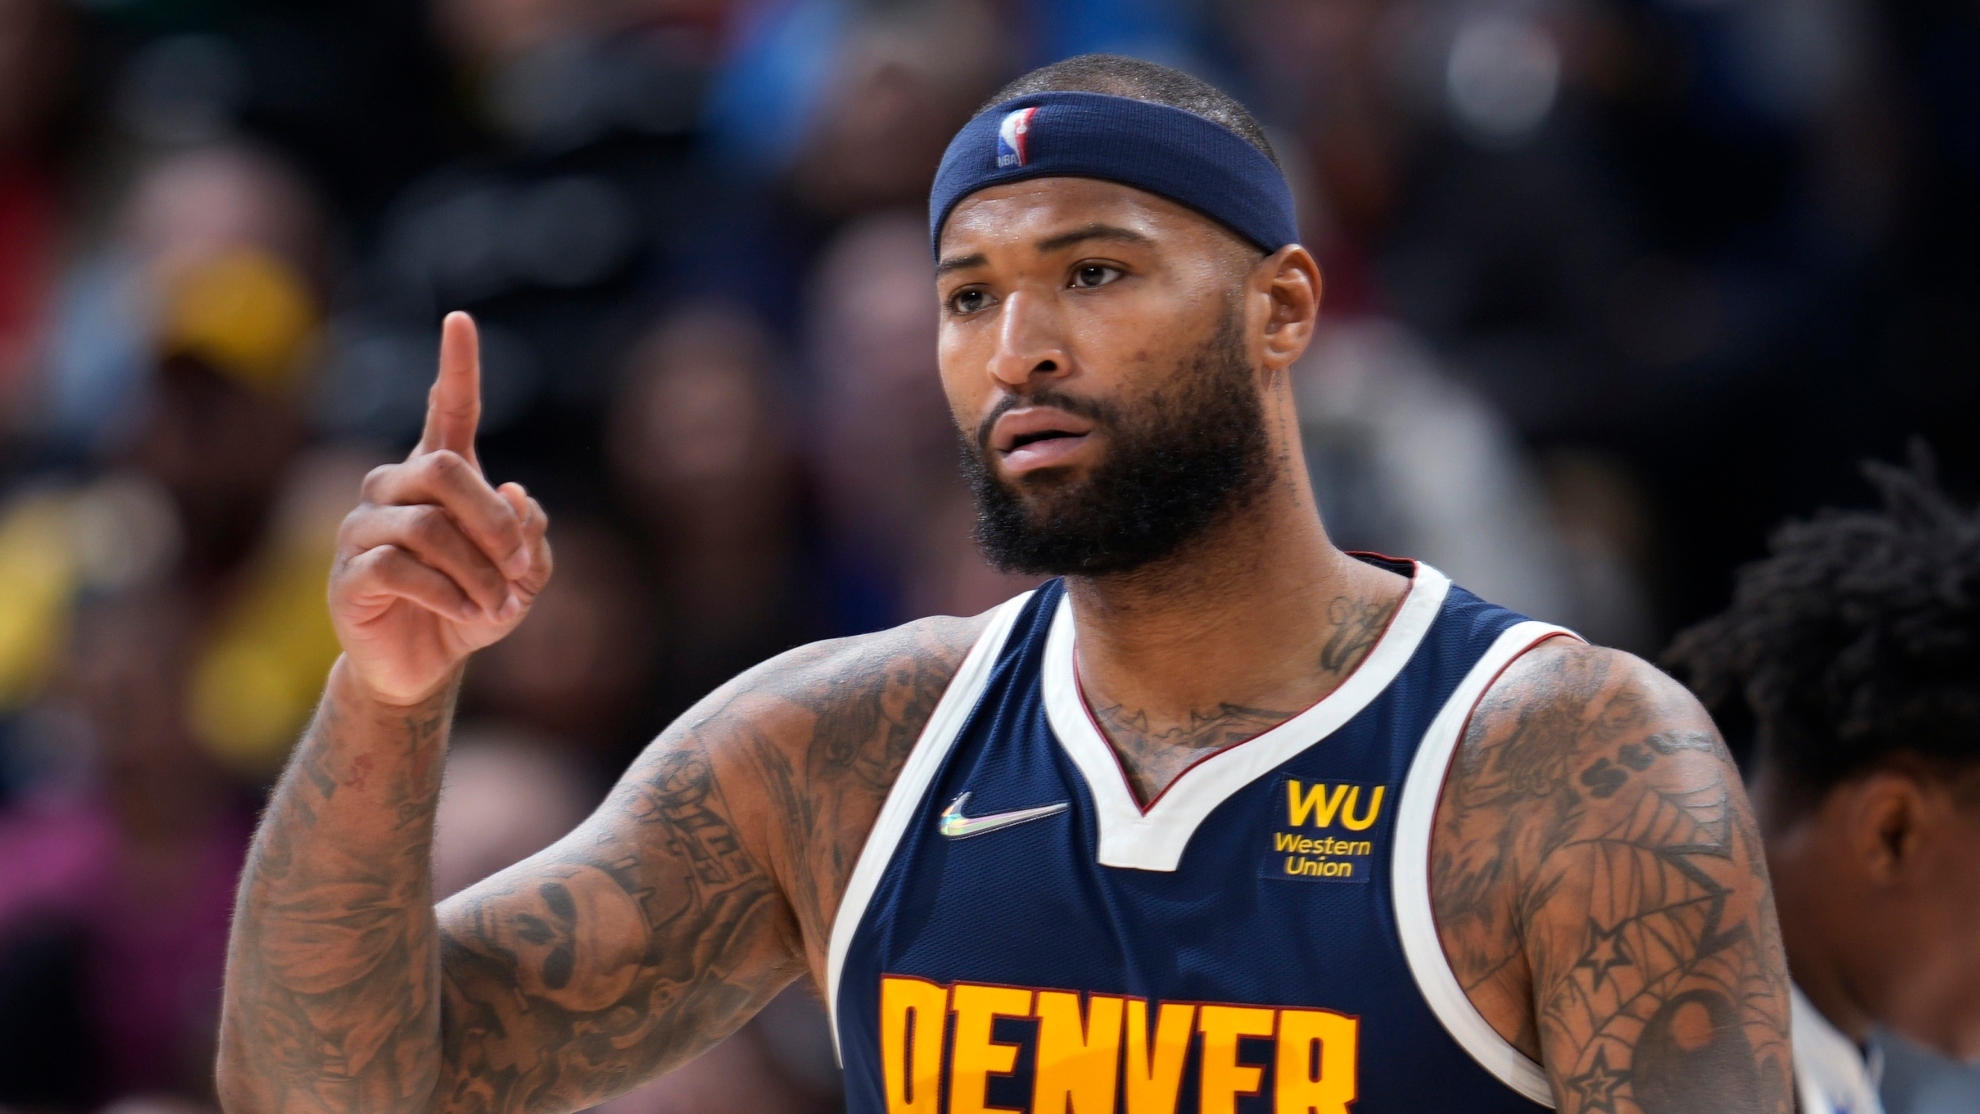 DeMarcus Cousins pointing to his replacement after being subbed out.